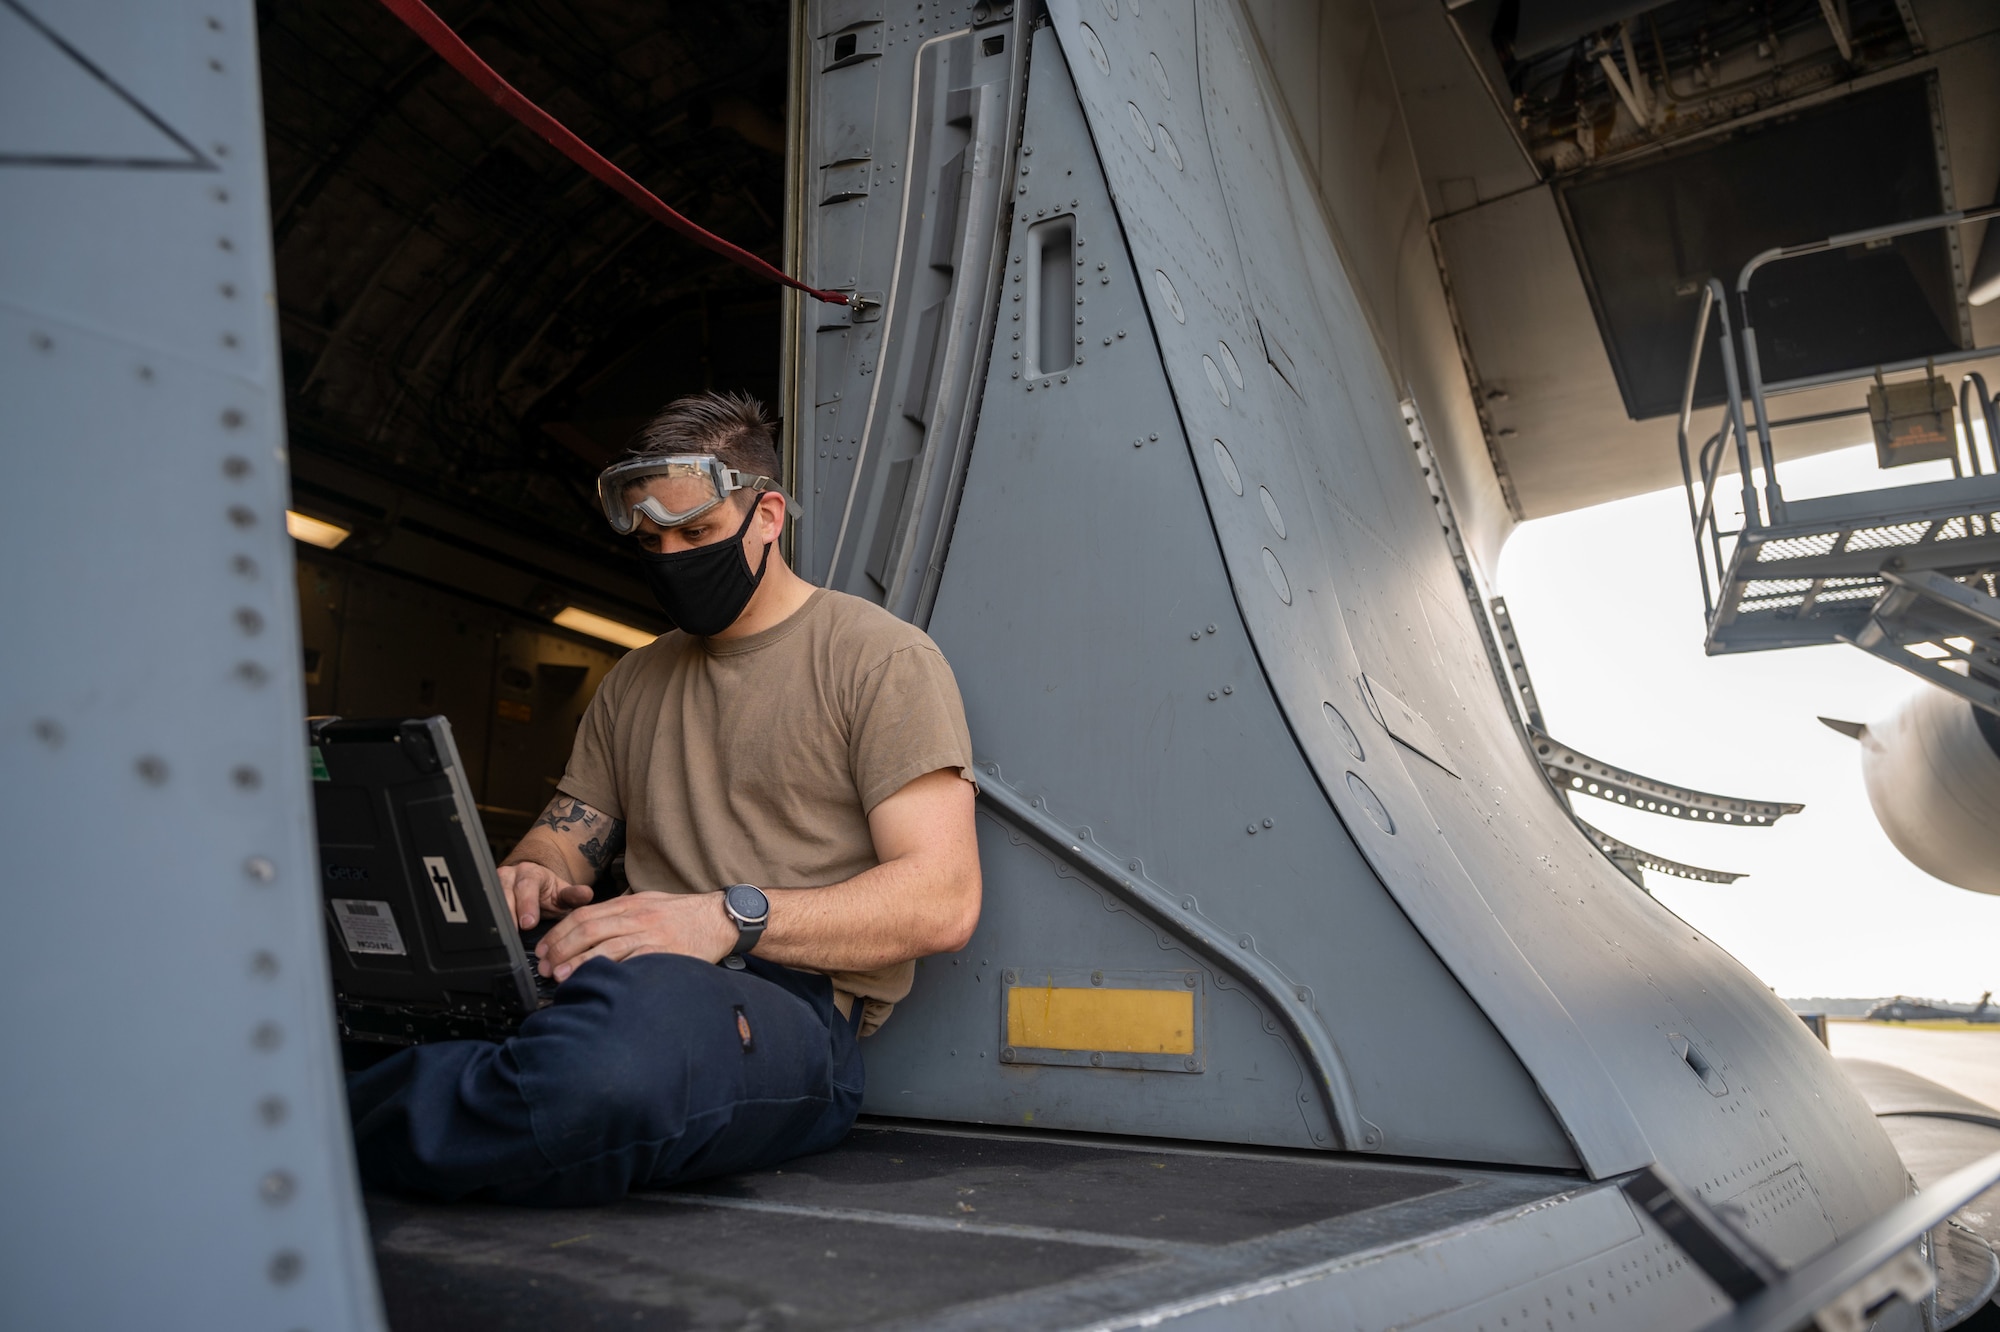 Staff Sgt. Timothy Clayton-Cornell, 736th Aircraft Maintenance Squadron crew chief, researches maintenance solutions next to an egress door on a Dover Air Force Base C-17 Globemaster III at Moody AFB, Georgia, Feb, 28, 2021. Aircrew from the 3rd Airlift Squadron identified a faulty plug housing on the C-17 following the completion of Exercise Mosaic Tiger. A three-Airmen Maintenance Recovery Team from Dover AFB was alerted and mobilized within 24 hours. The MRT, along with the flying crew chief assigned to the C-17, coordinated parts and tools from Joint Base Charleston, South Carolina, to ensure the successful return of the aircraft to Dover AFB. (U.S. Air Force photo by Airman 1st Class Faith Schaefer)